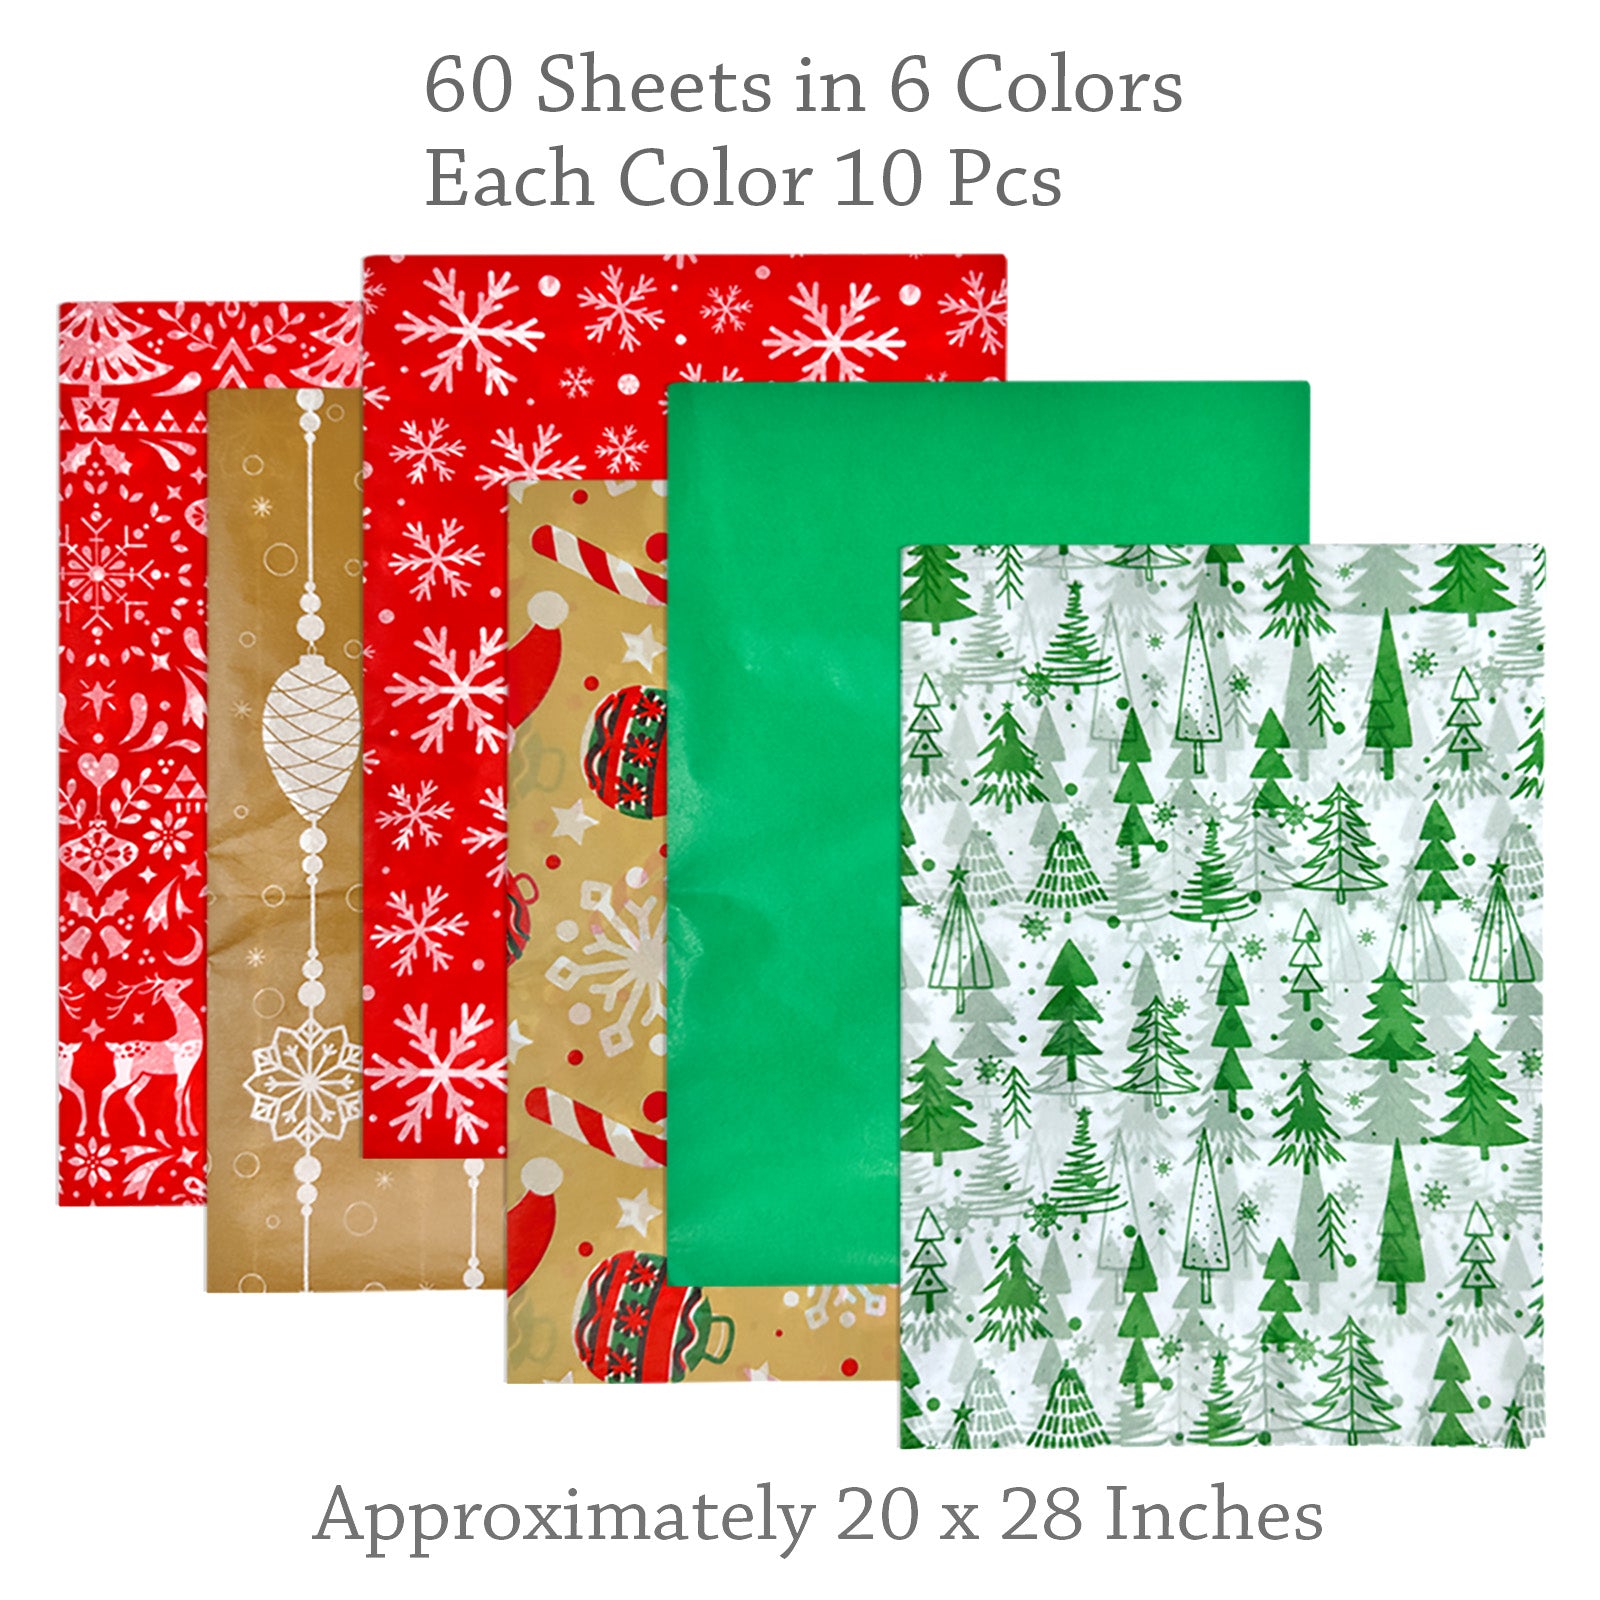 Wrapables Tissue Paper 20 x 28 inch for Gift Wrapping, Arts & Crafts, Paper Flowers, Garlands, Tassels (60 Sheets) Holiday Plaid